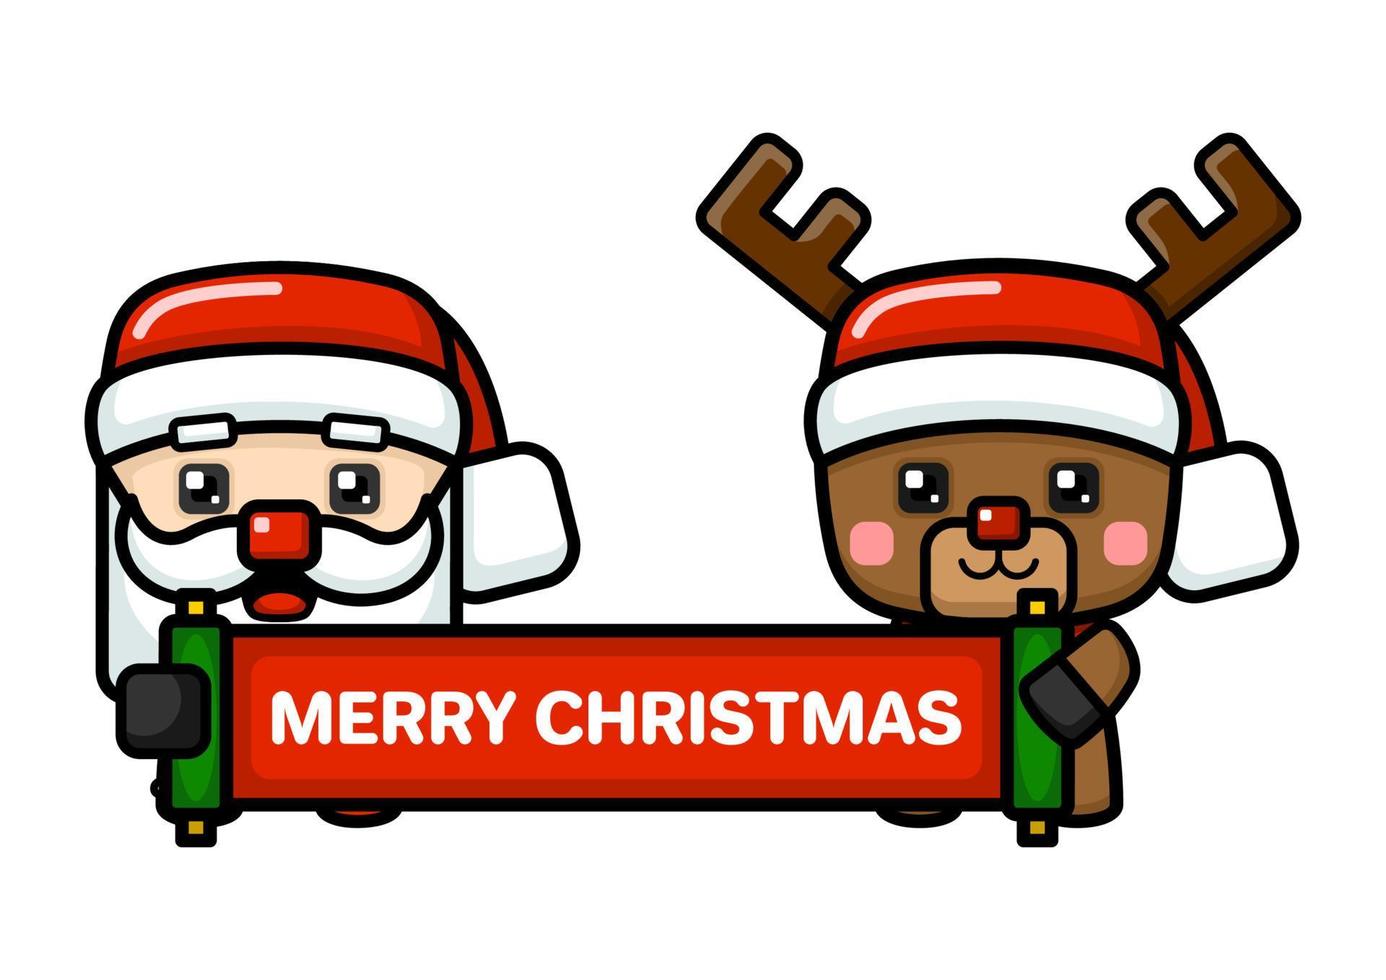 Cube Style Santa Claus And Reindeer Holding Banner vector